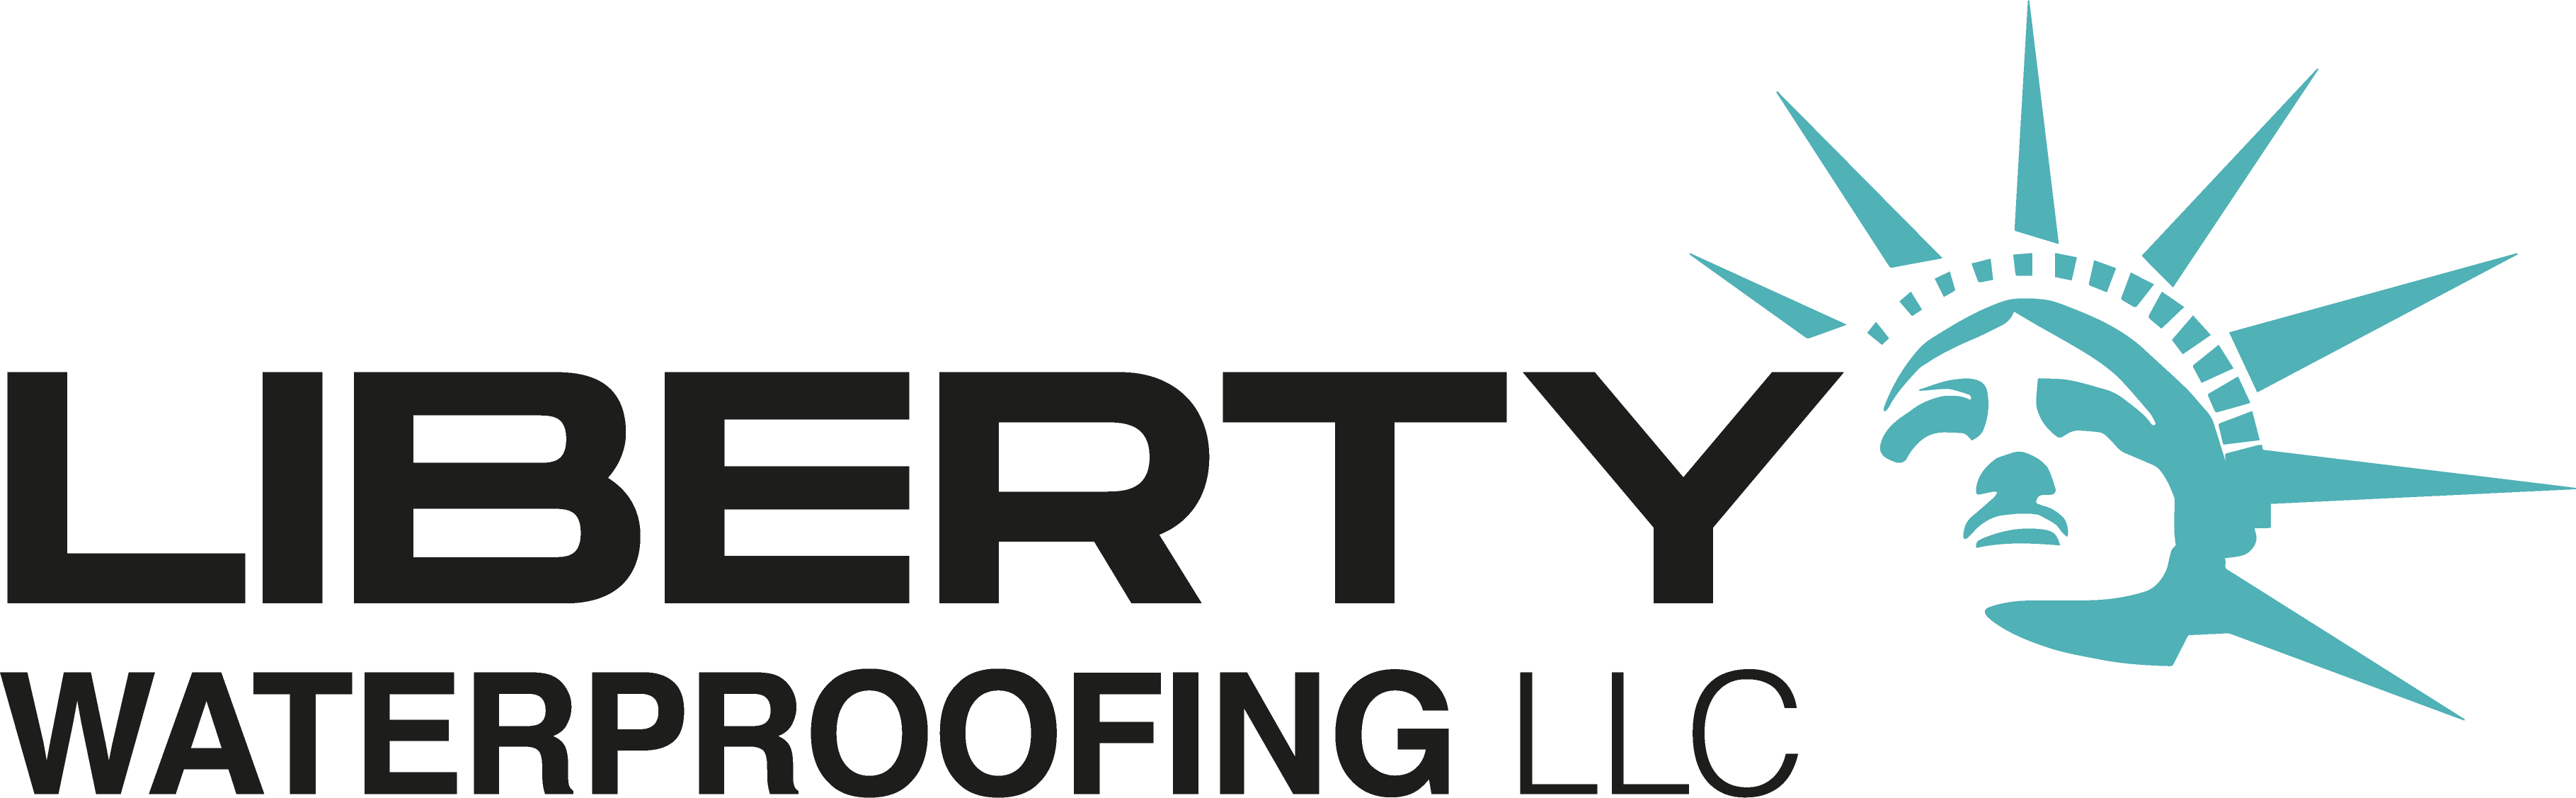 Liberty Waterproofing LLC - Protect What Matters Most